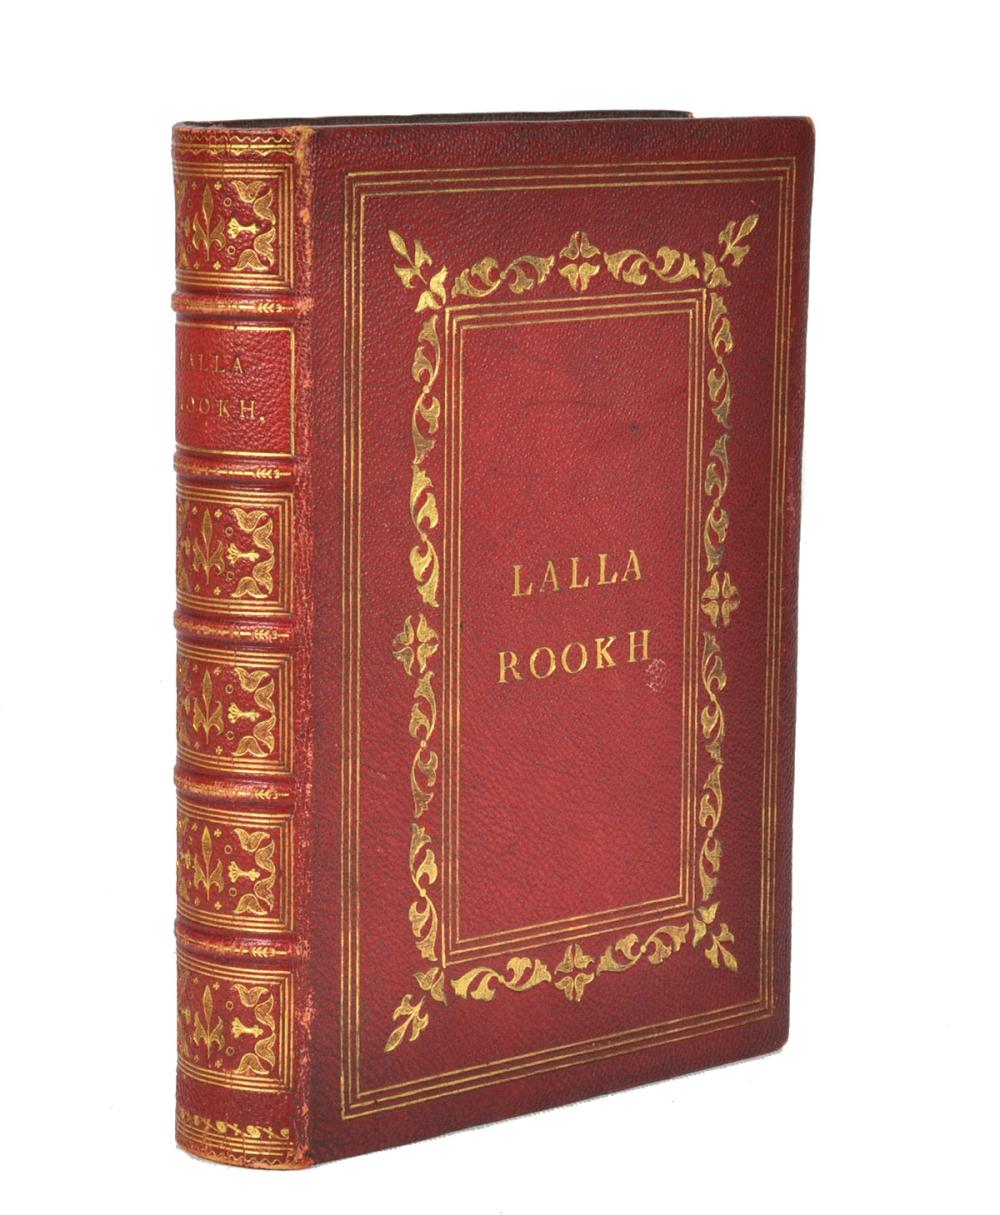 LALLA ROOKH AN ORIENTAL ROMANCE BY